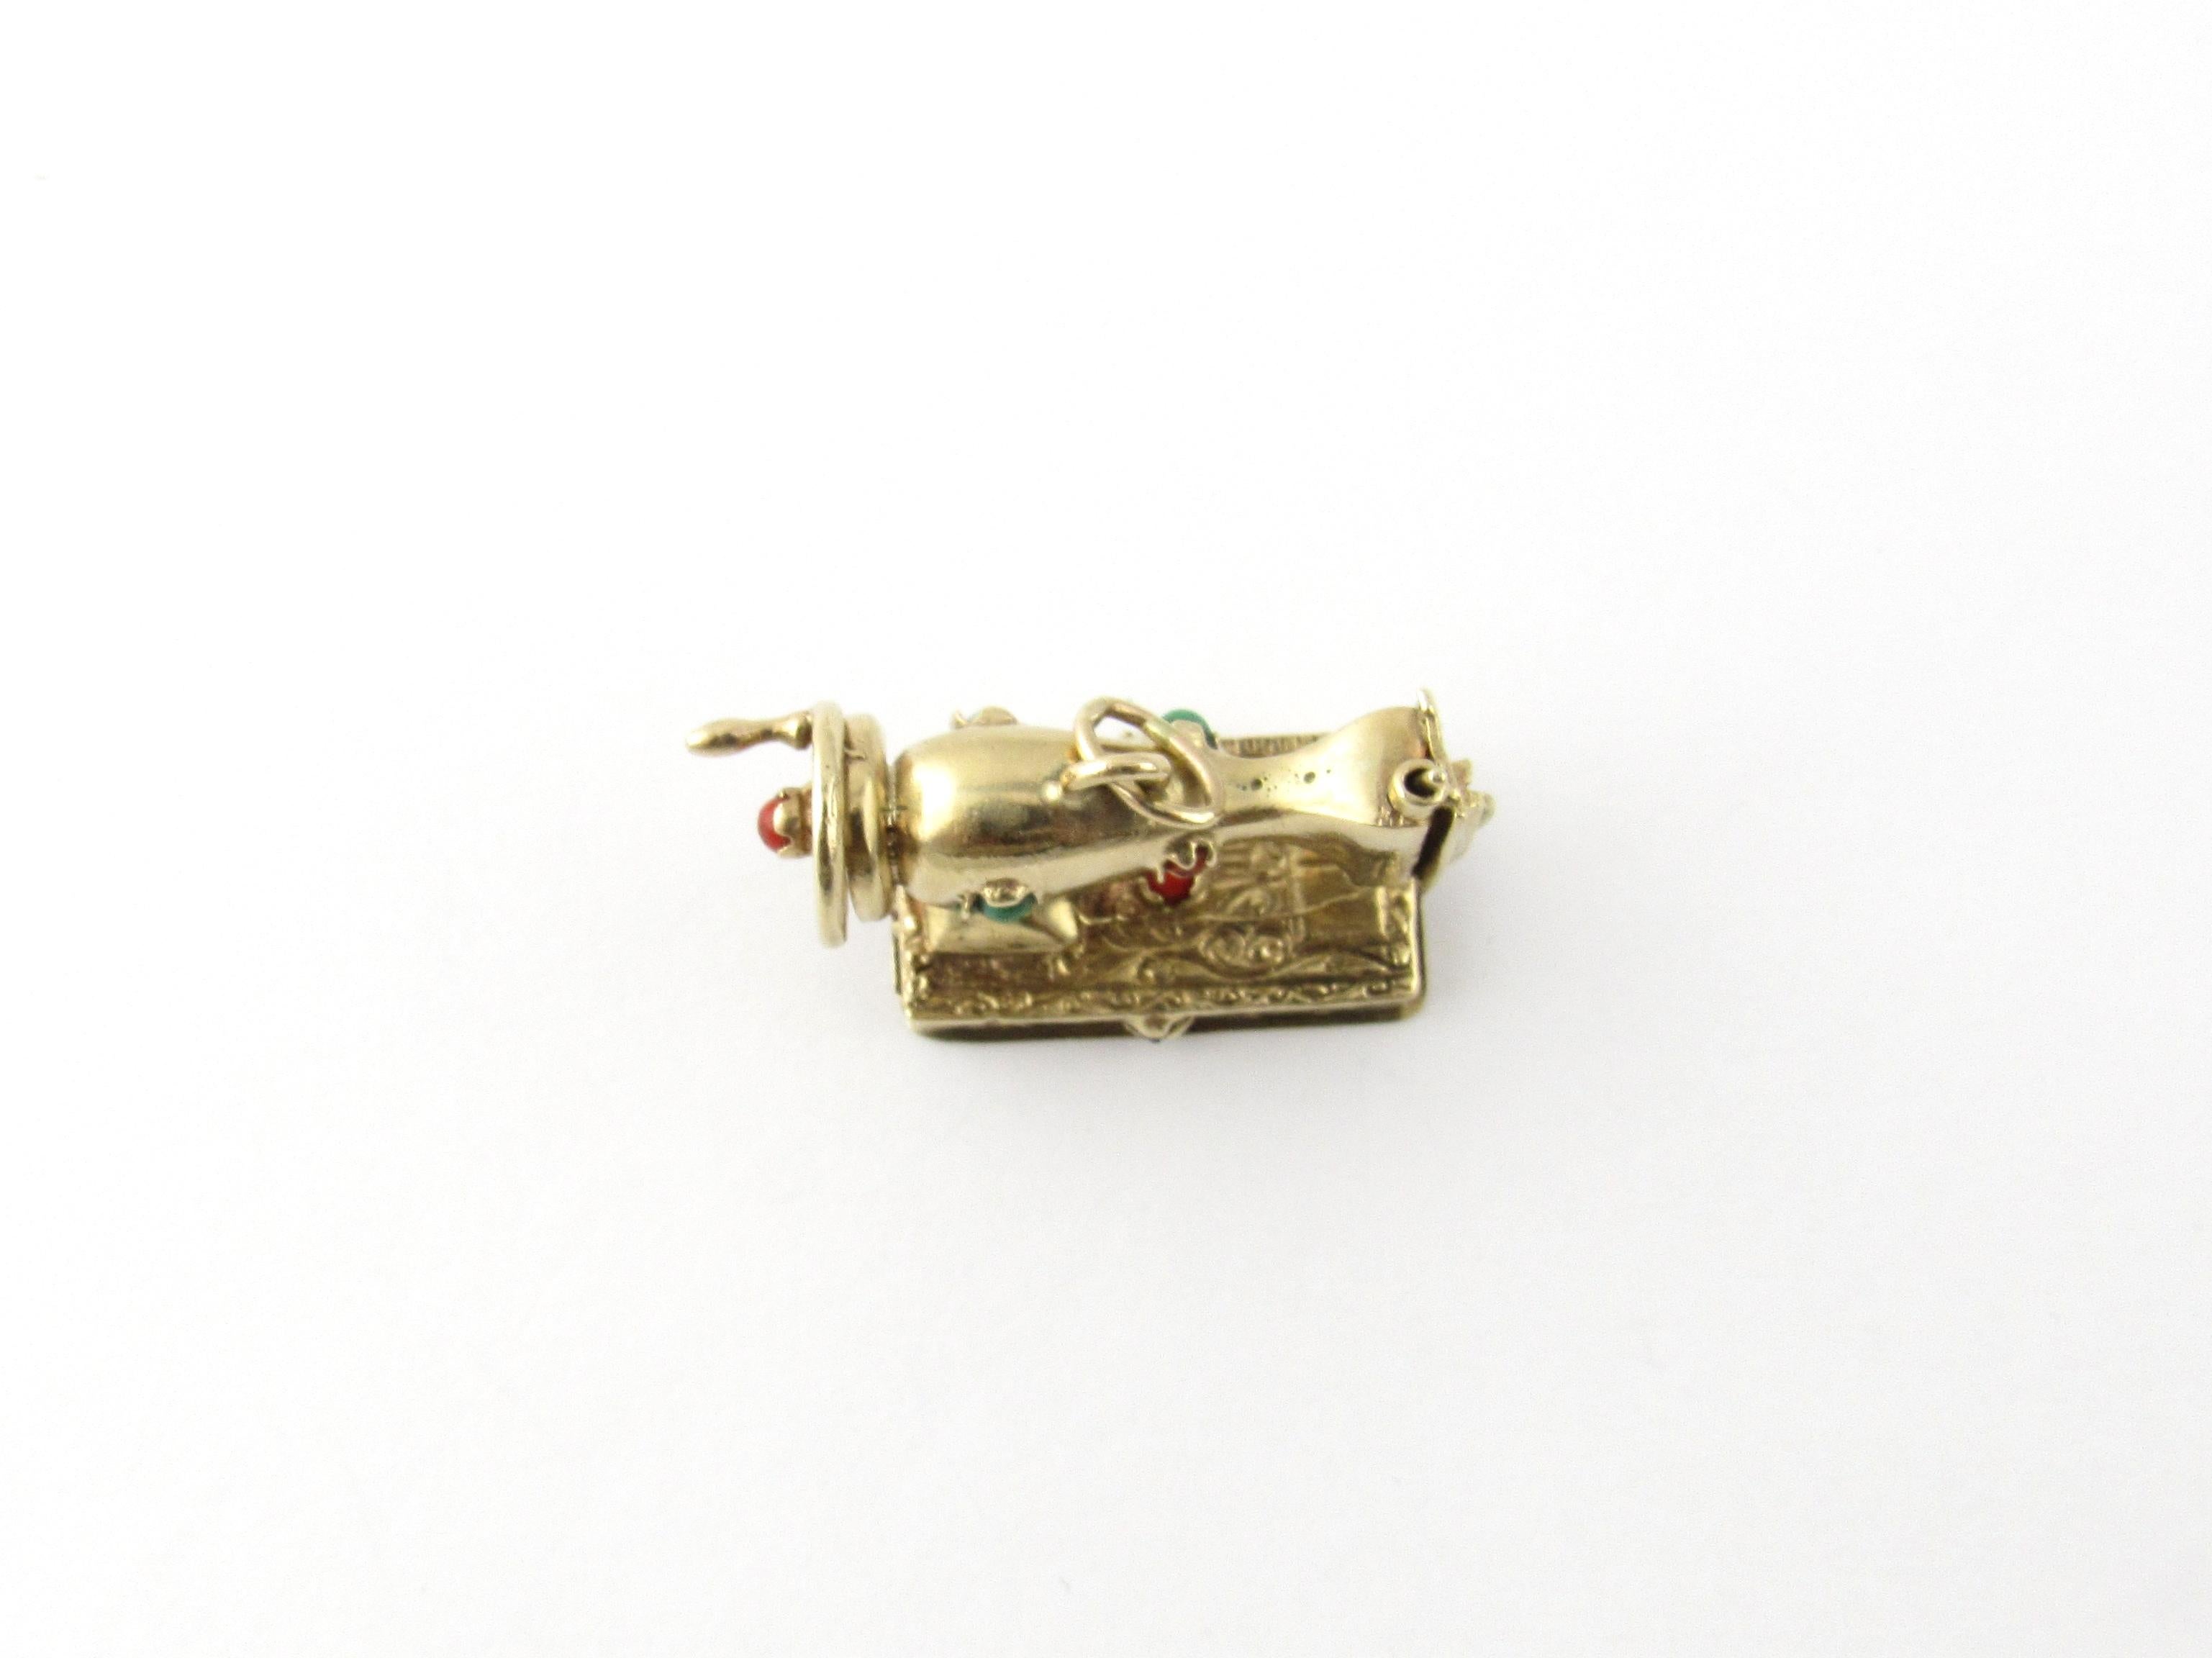 Vintage 14 Karat Yellow Gold Mechanical Sewing Machine Charm

Perfect gift for the aspiring designer!

This lovely 3D charm features a miniature sewing machine with wheel that spins and bobbin that moves up and down. Decorated with ten multicolored